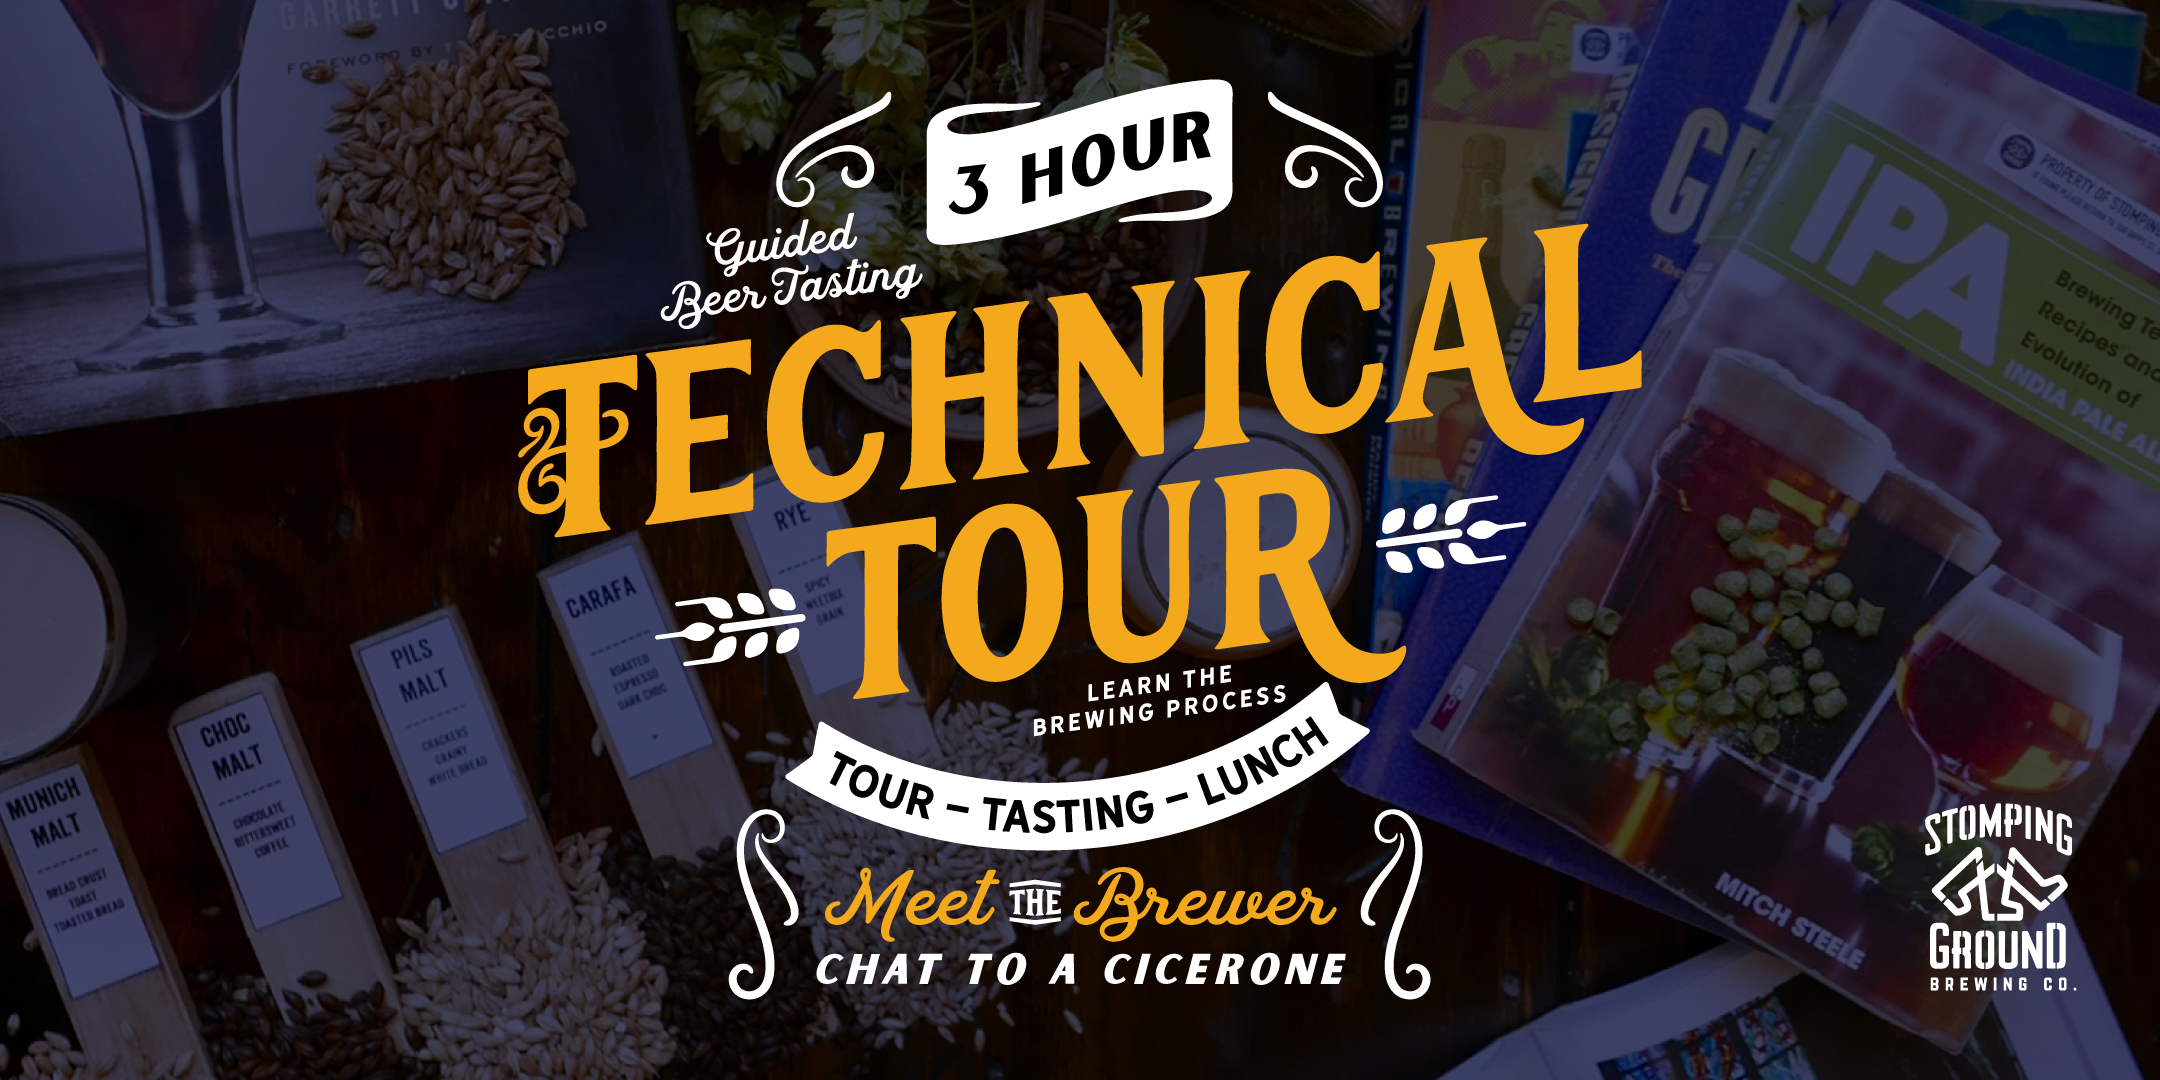 Stomping Ground Brewery 3-hour Technical Tour